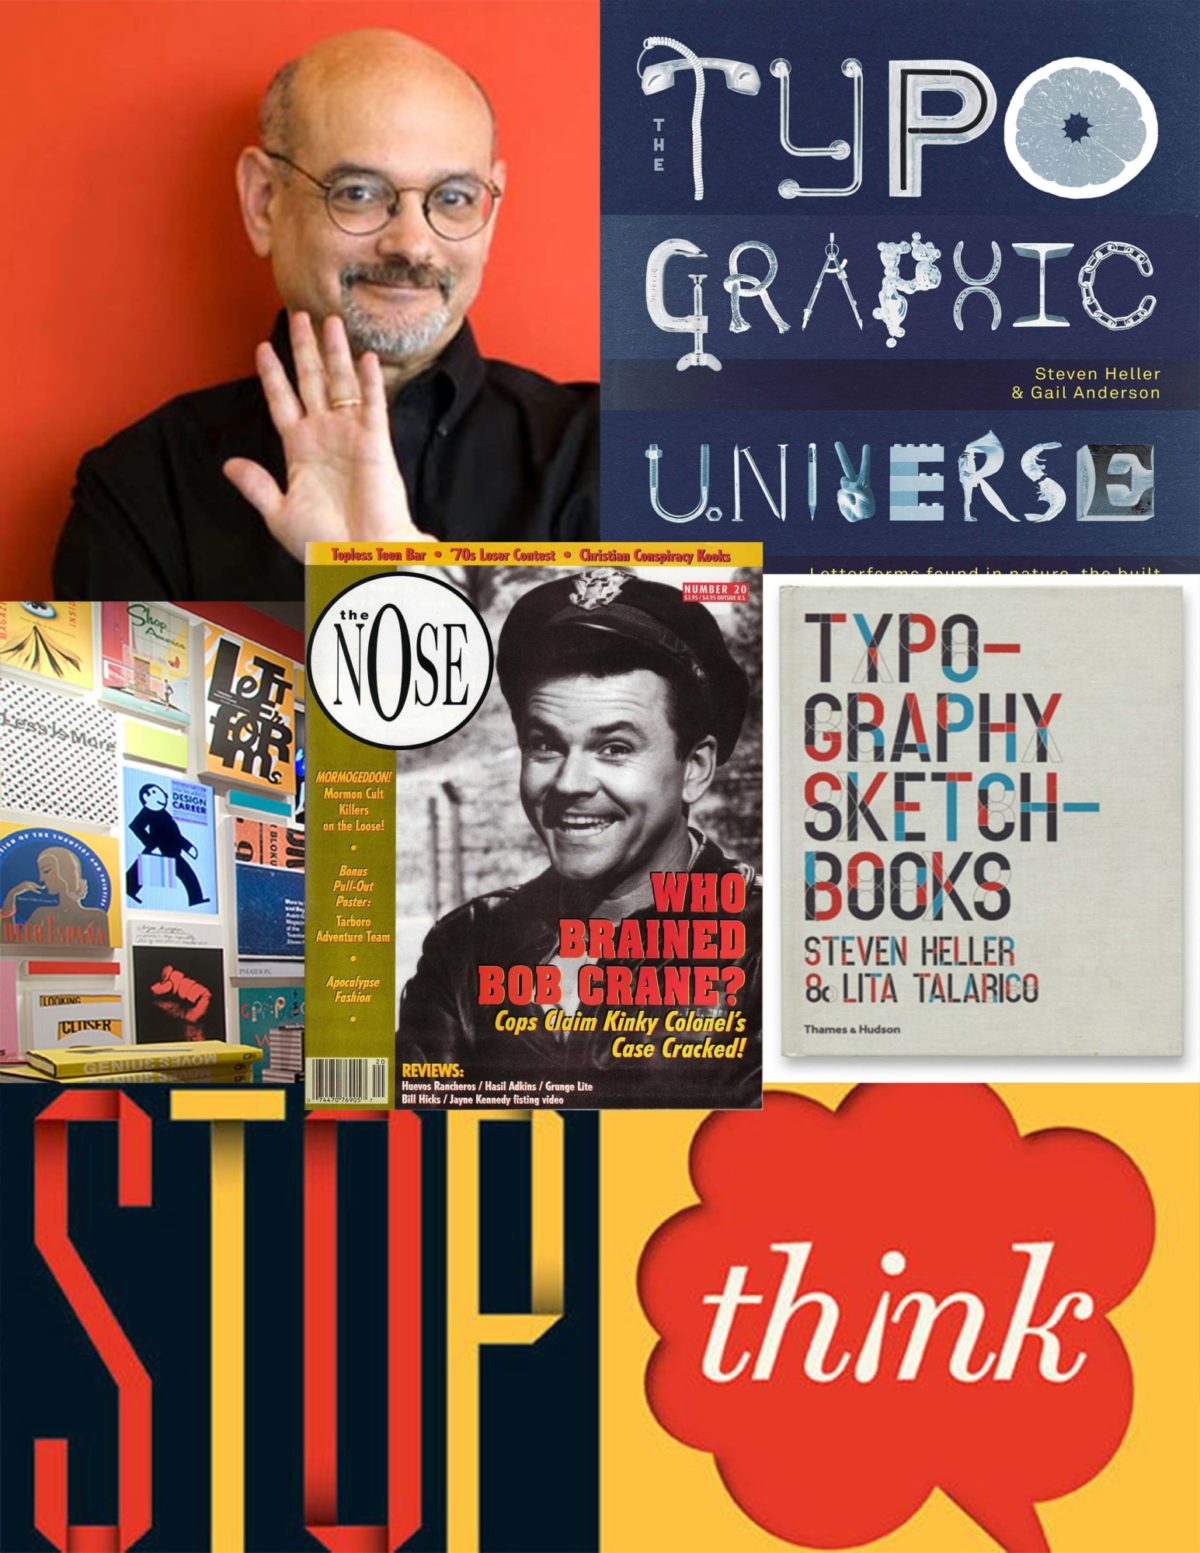 A text collage poster of a man with glasses at the corner and different book covers.